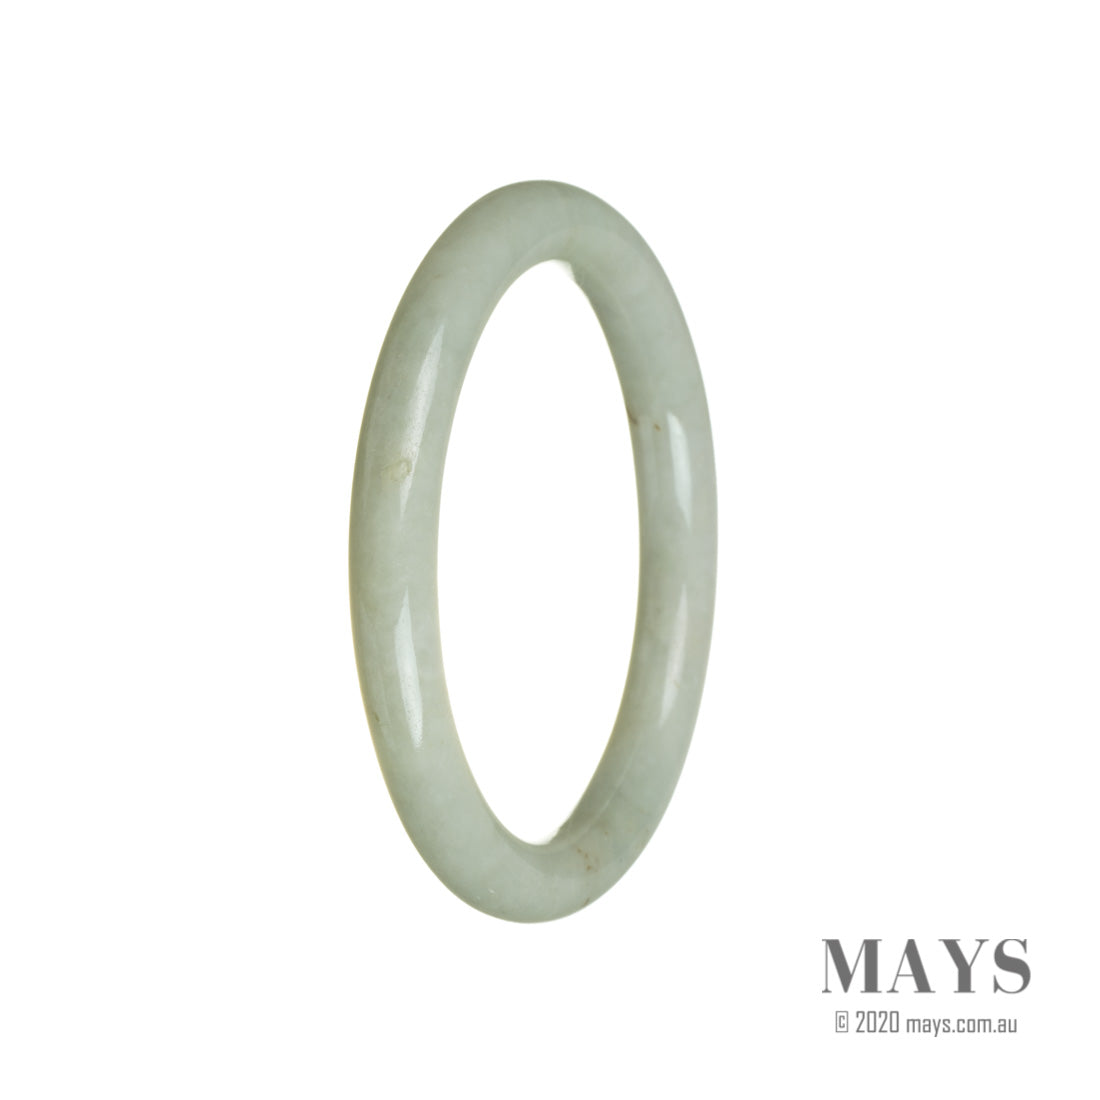 A pale green traditional jade bangle bracelet with a certified Grade A quality. The bracelet is oval-shaped and measures 58mm in diameter. Sold by MAYS GEMS.